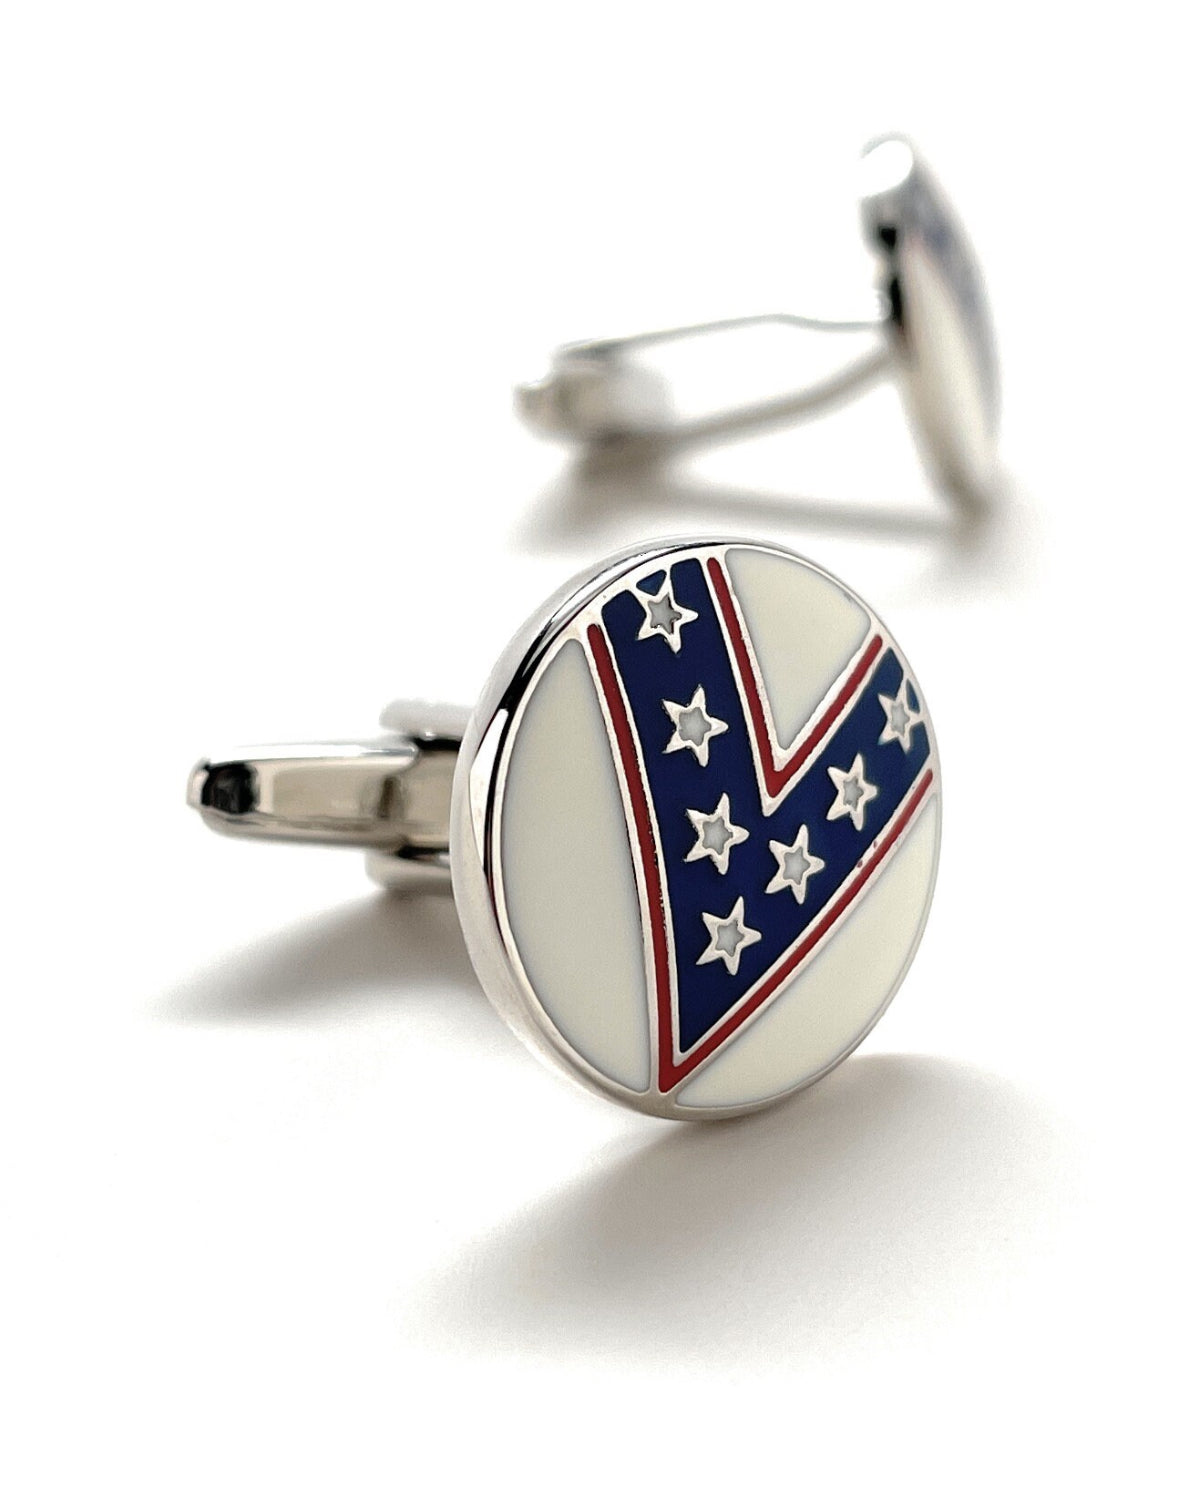 Evel Knievel Cufflinks King of the Daredevils Super Jumps 1970's Cuff Links